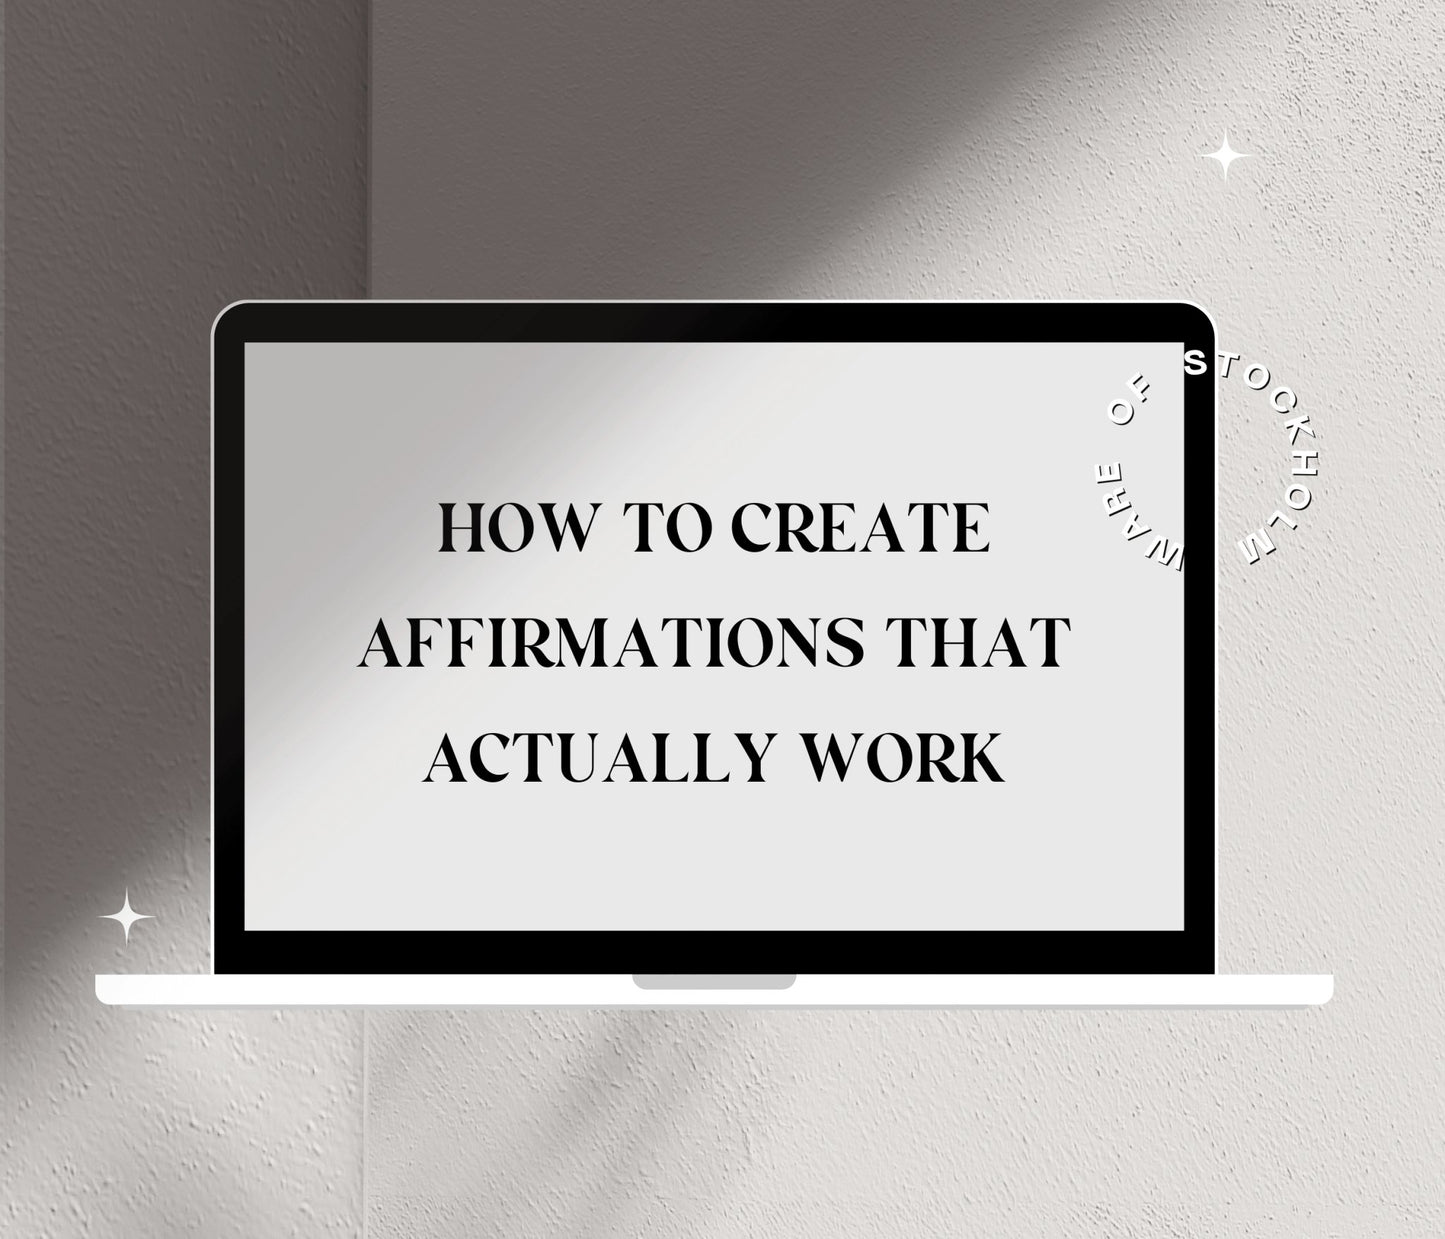 How To Create Affirmations That Actually Work - Ware of Stockholm